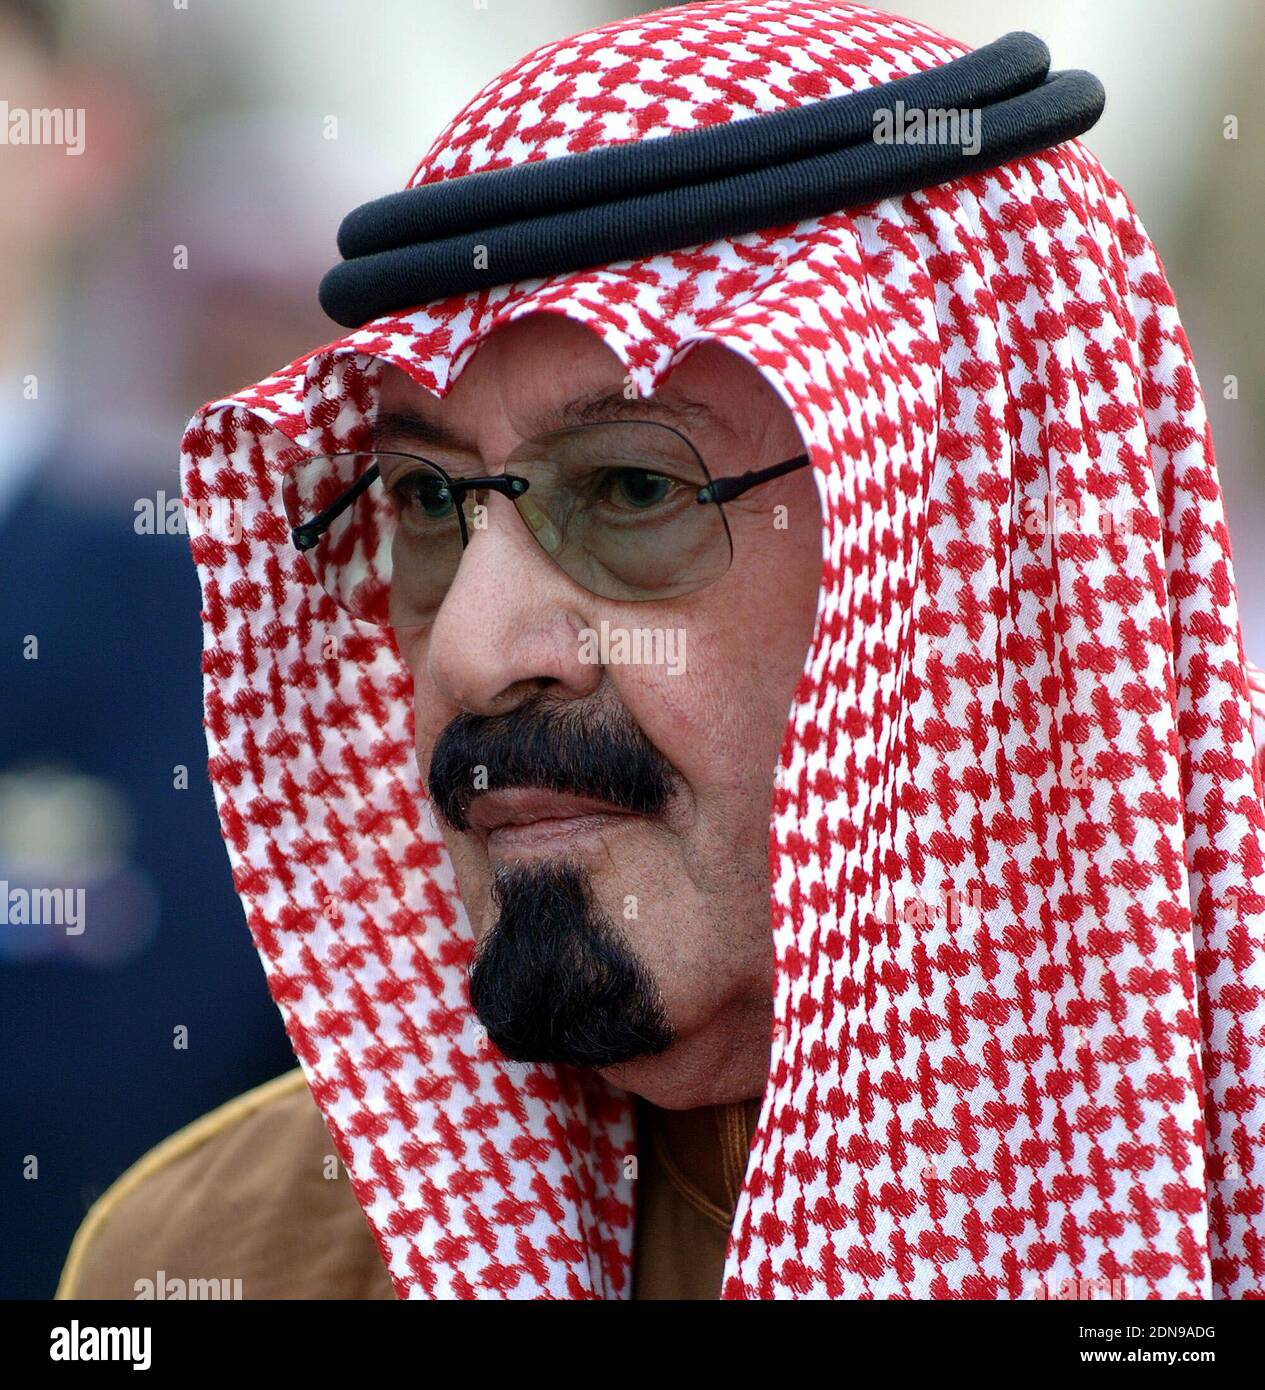 Saudi King Abdullah bin Abdulaziz has died, royal officials have announced, weeks after he was admitted to hospital. King Abdullah, who was said to be aged about 90, had been suffering from a lung infection. A statement early on Friday said his 79-year-old half brother, Salman, had become king. File photo : King Abdullah Bin Abdulaziz Al Saoud greetting Jacques Chirac when he arrives at Riyadh airport, Saudi Arabia on March 4, 2006. Photo by Mousse/ABACAPRESS.COM. Stock Photo